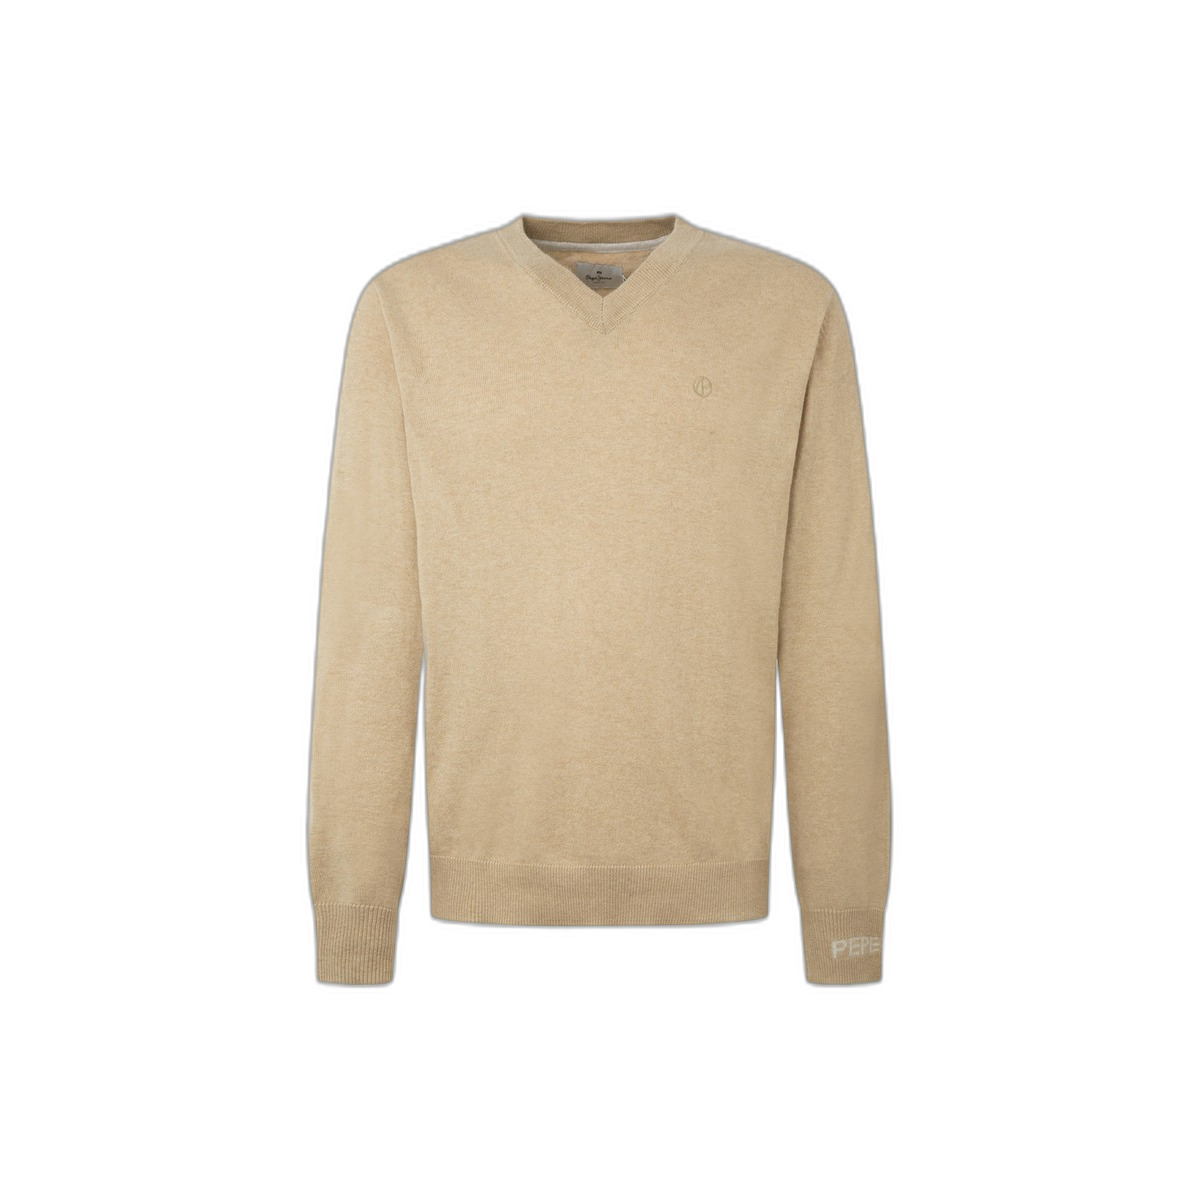 pullover col v pepe jeans andre